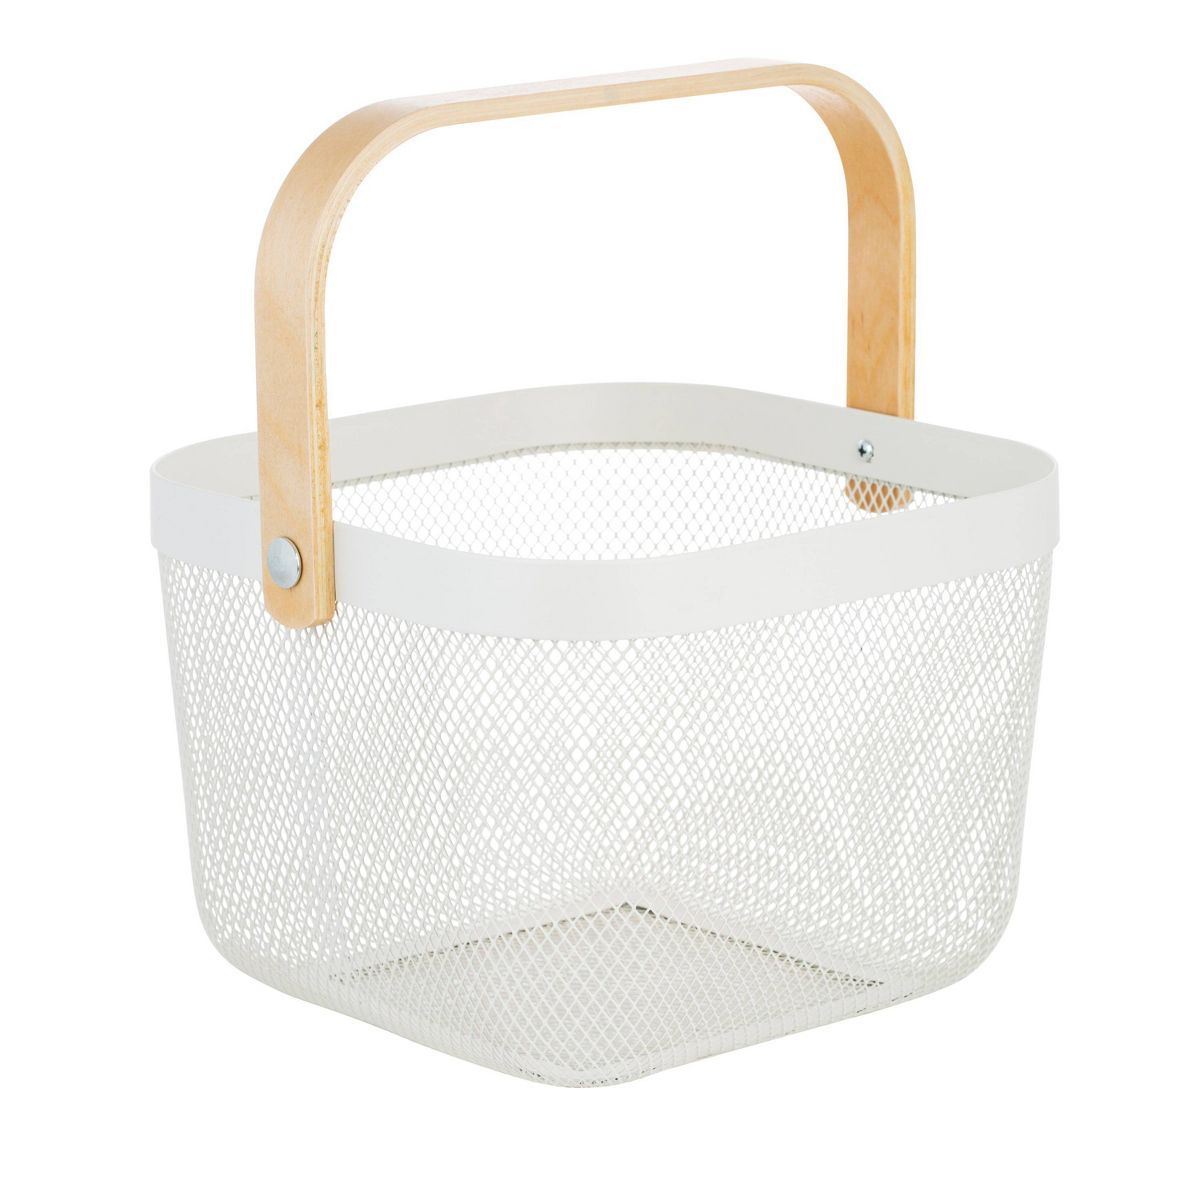 Simplify Mesh Tote with Bamboo Handle White | Target